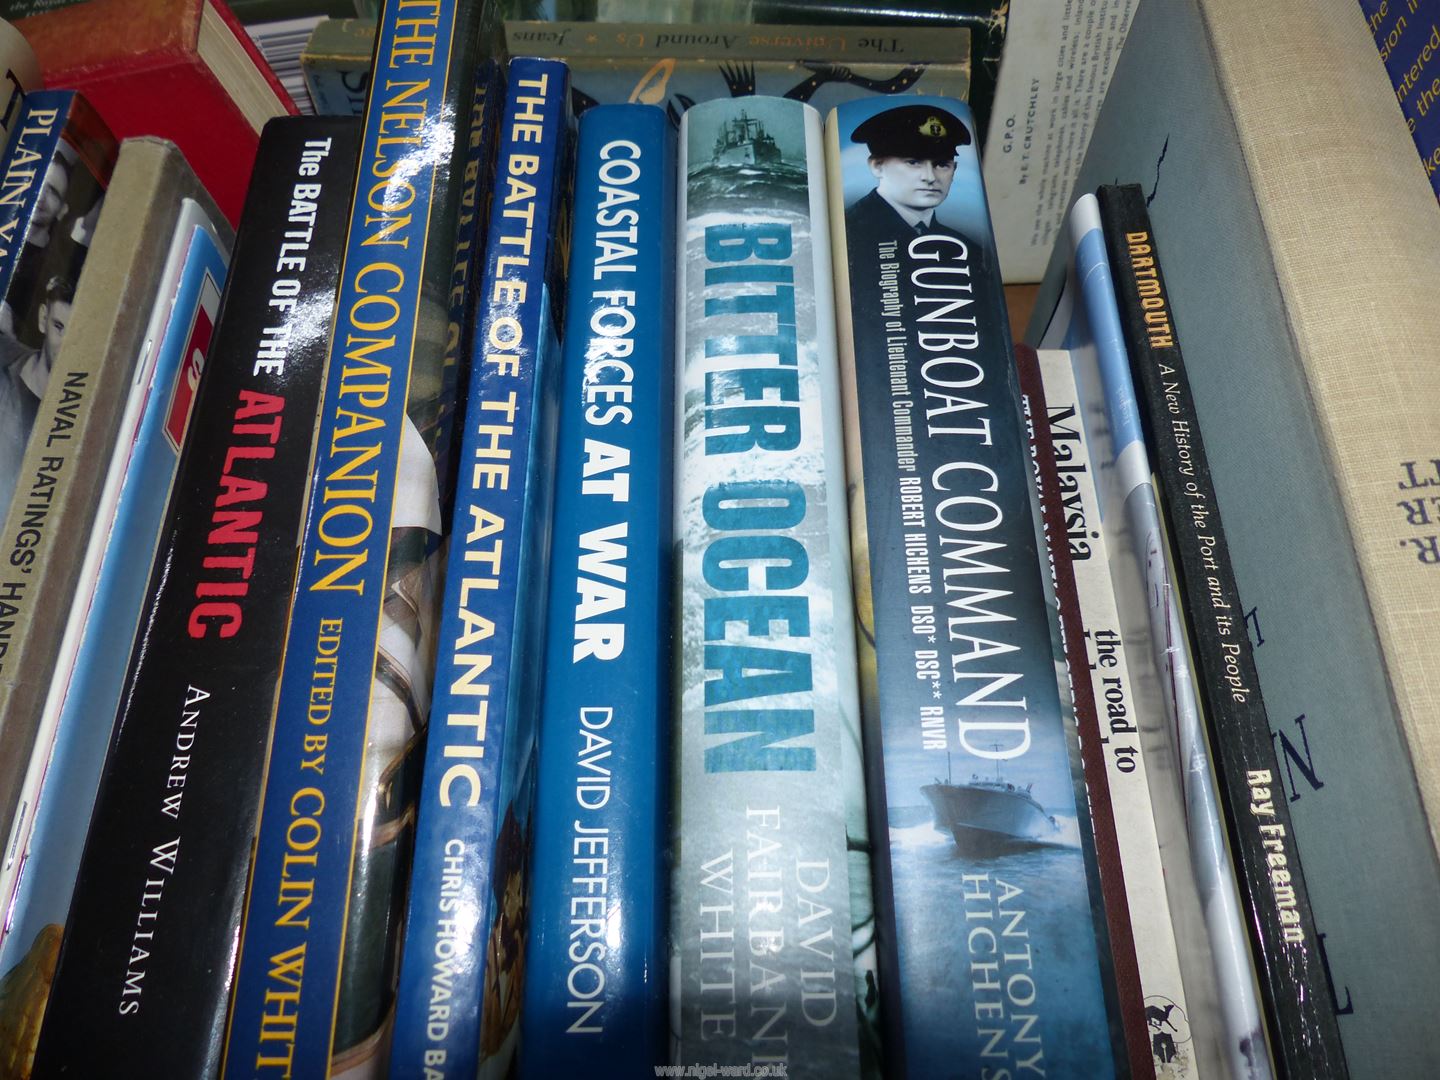 A quantity of Naval war books to include The Battle of The Atlantic, The Battle of The Narrow seas, - Image 3 of 4